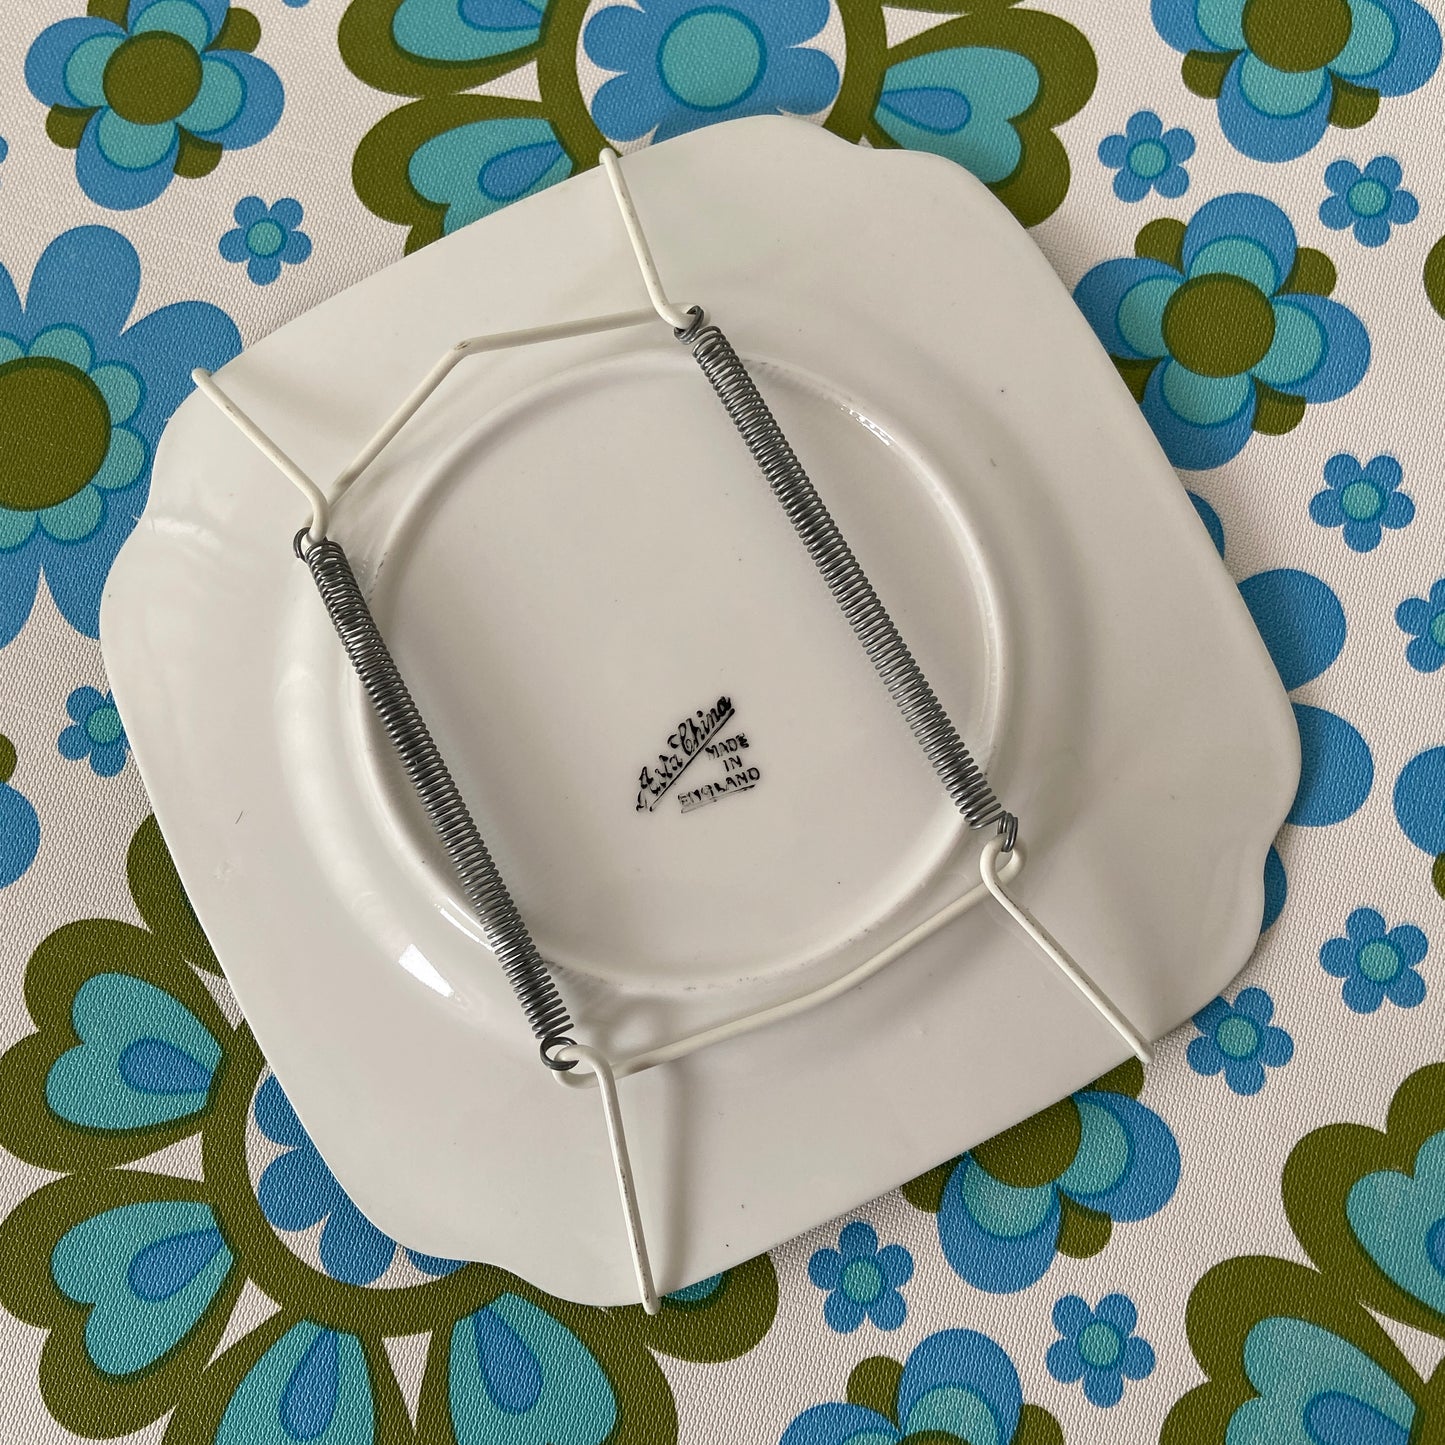 Ready to Hang Adorable Vintage Floral Plate Made in England